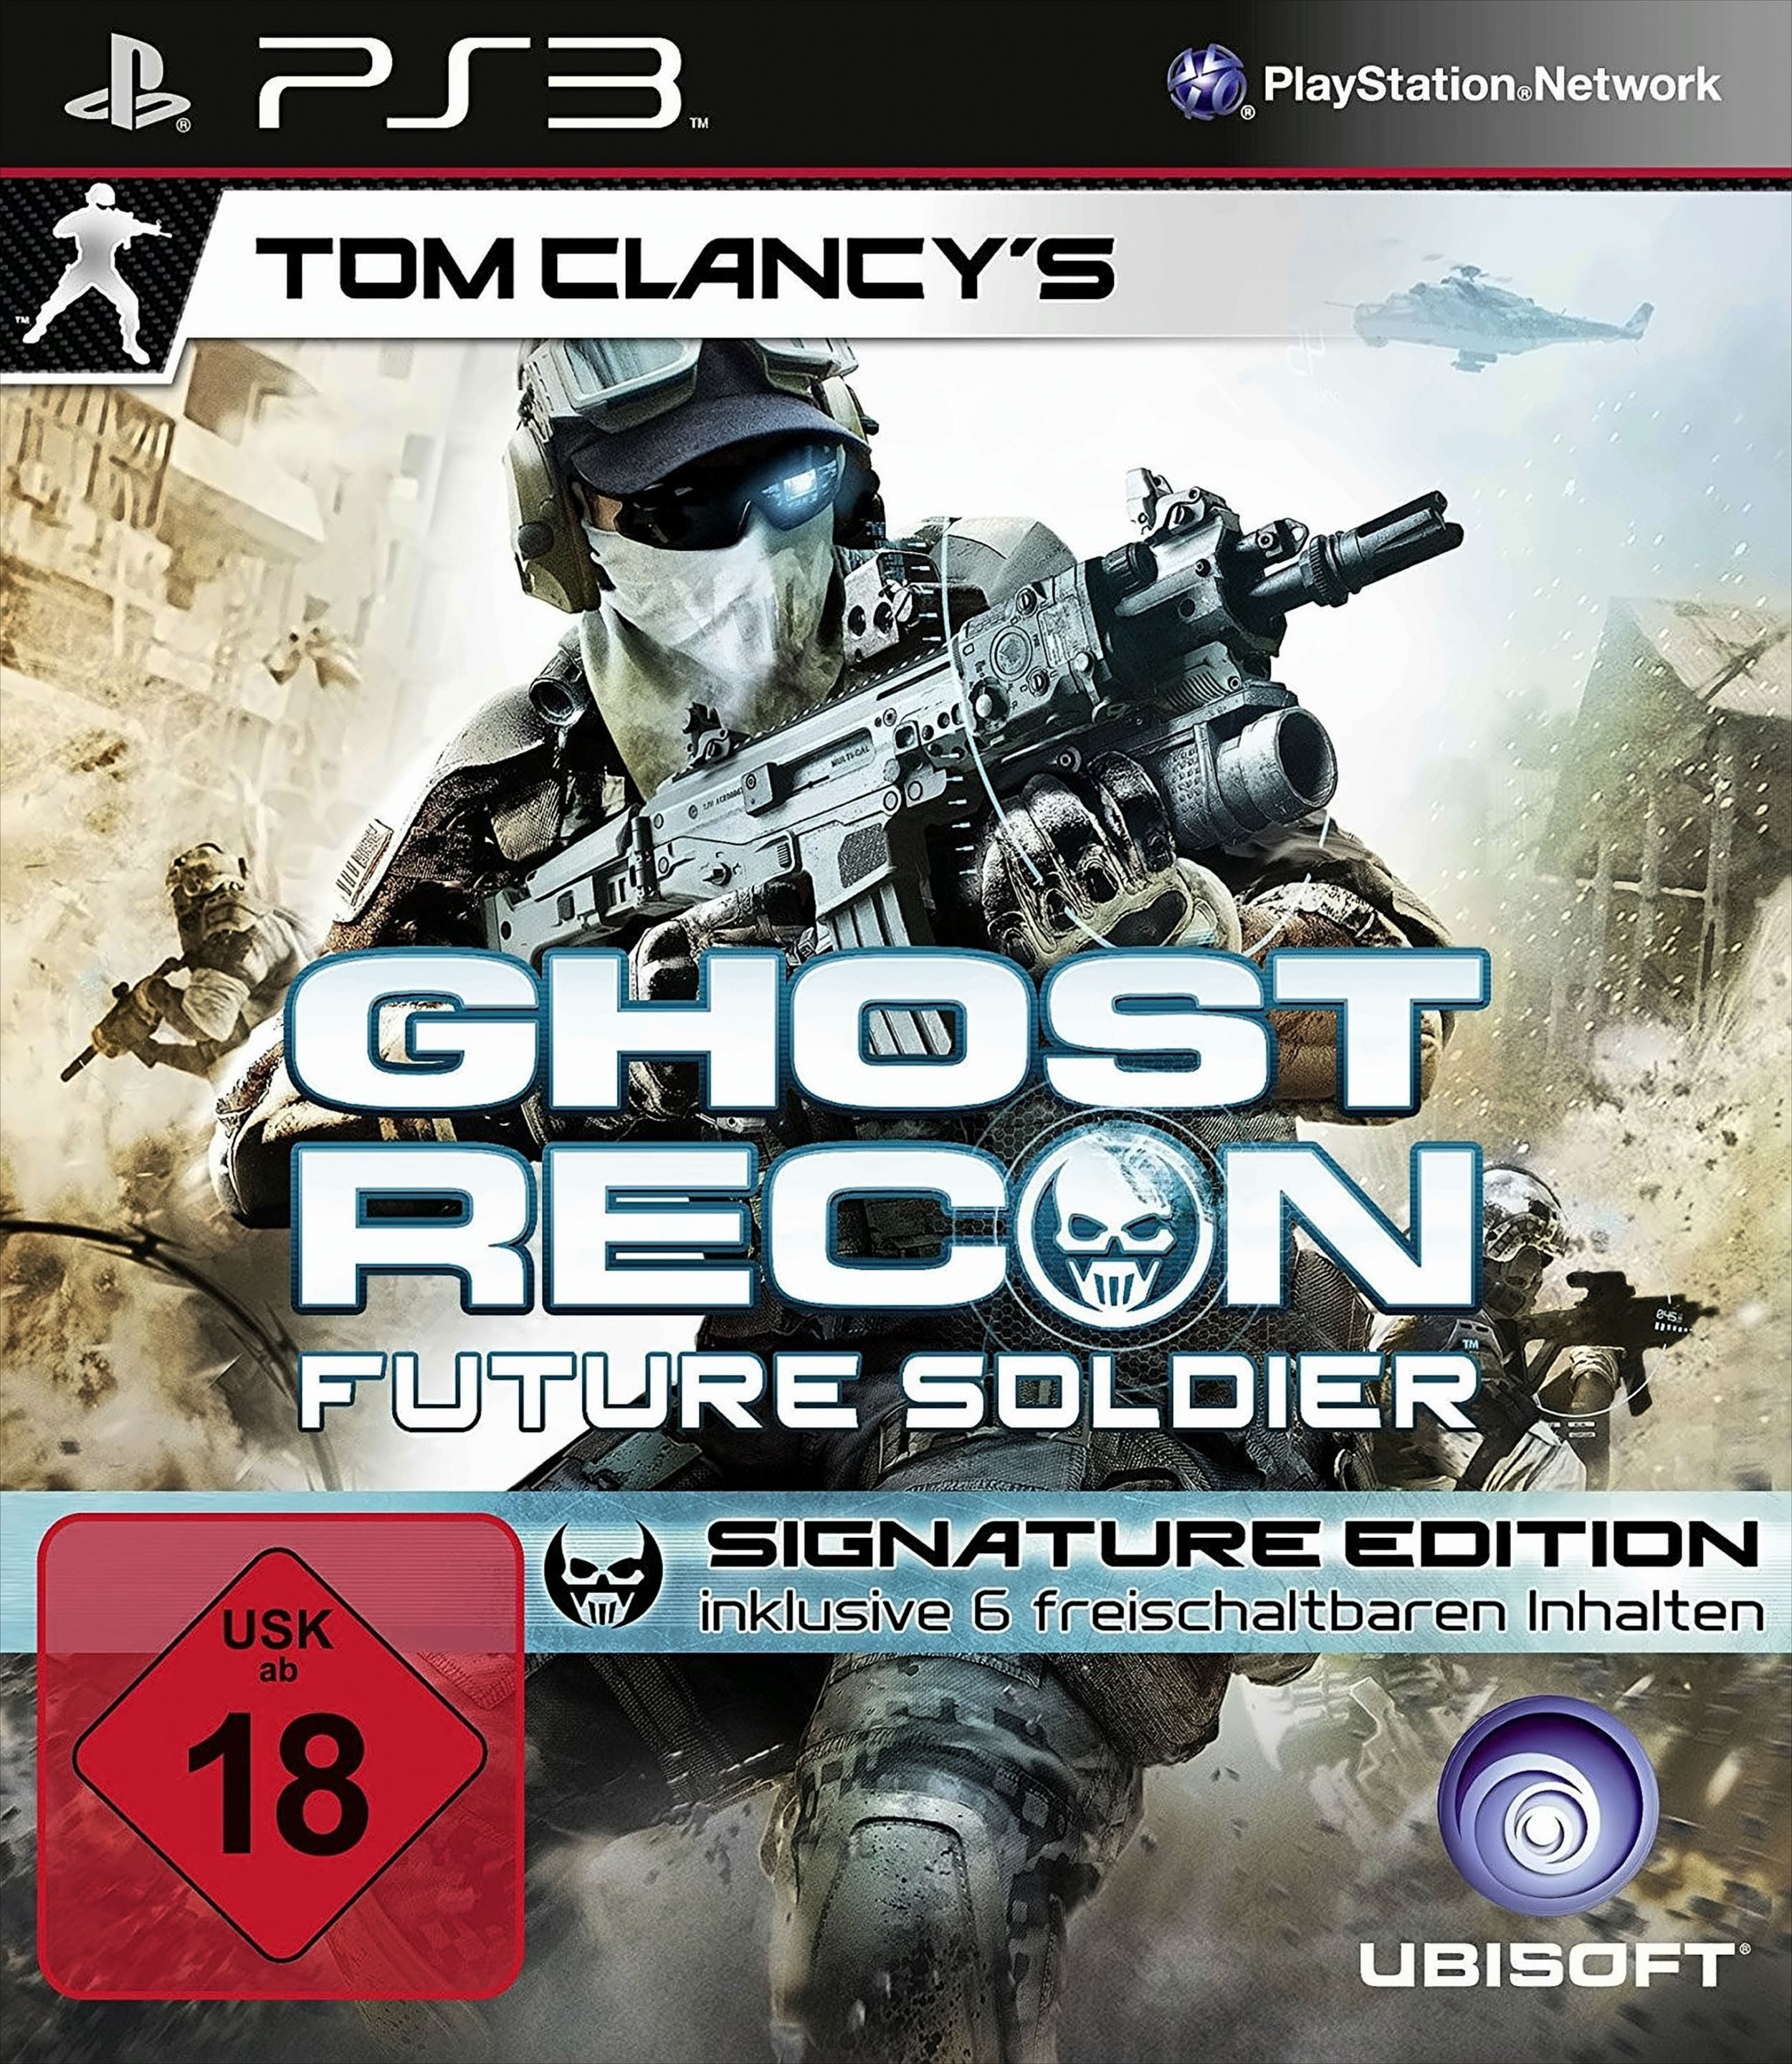 Tom Clancy's Ghost Recon: Future Soldier - Signature Edition Playstation 3